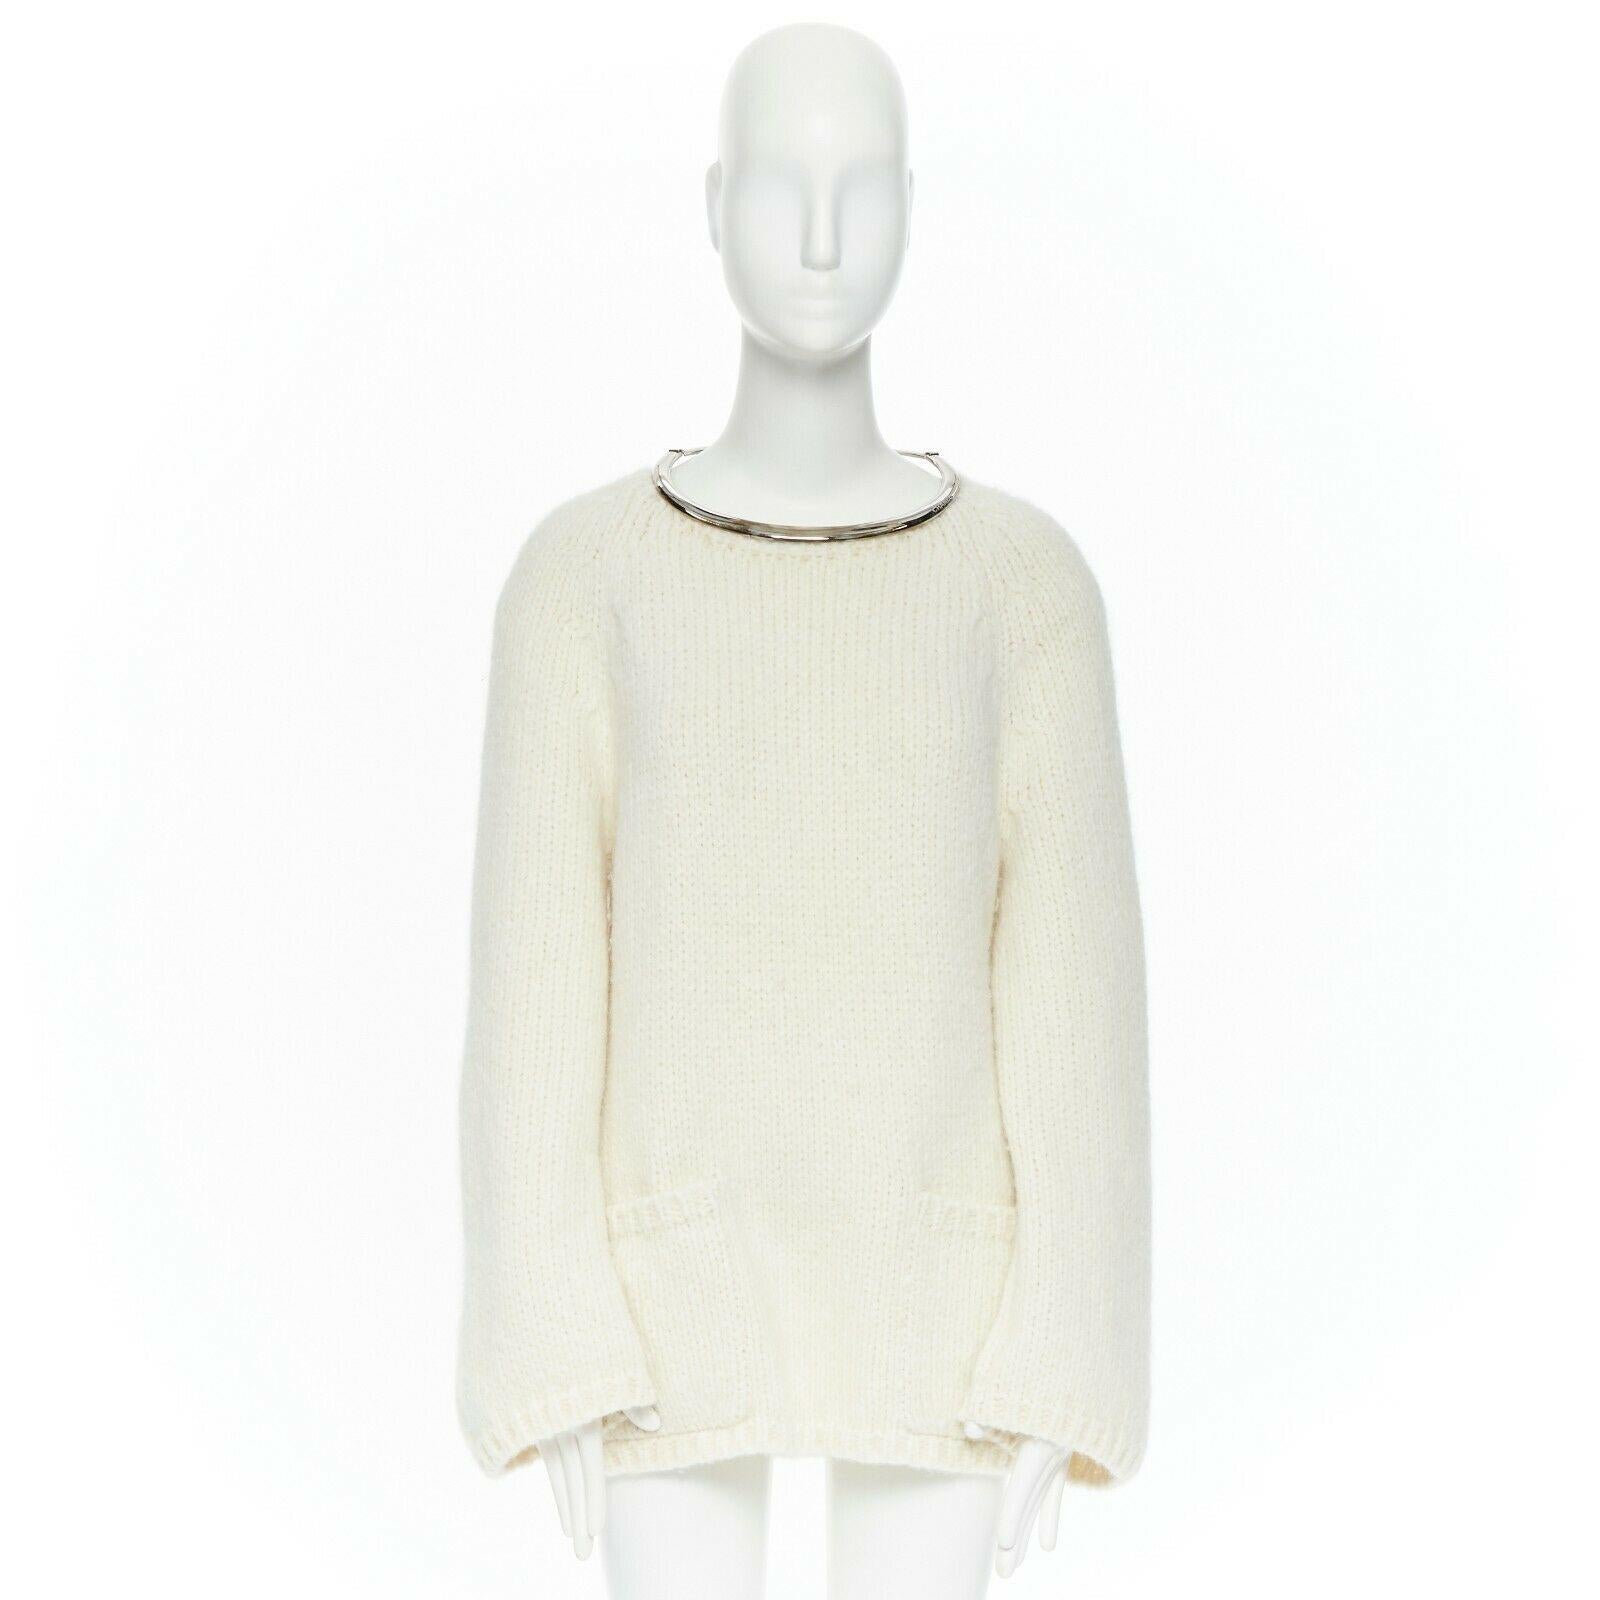 runway CHANEL 18A white alpaca knit dual patch pocket oversized sweater FR42
Brand: CHANEL
Designer: Karl Lagerfeld
Collection: 18A
Model Name / Style: Sweater
Material: Alpaca
Color: Ecru
Pattern: Solid
Closure: Pullover
Extra Detail: Cable knit